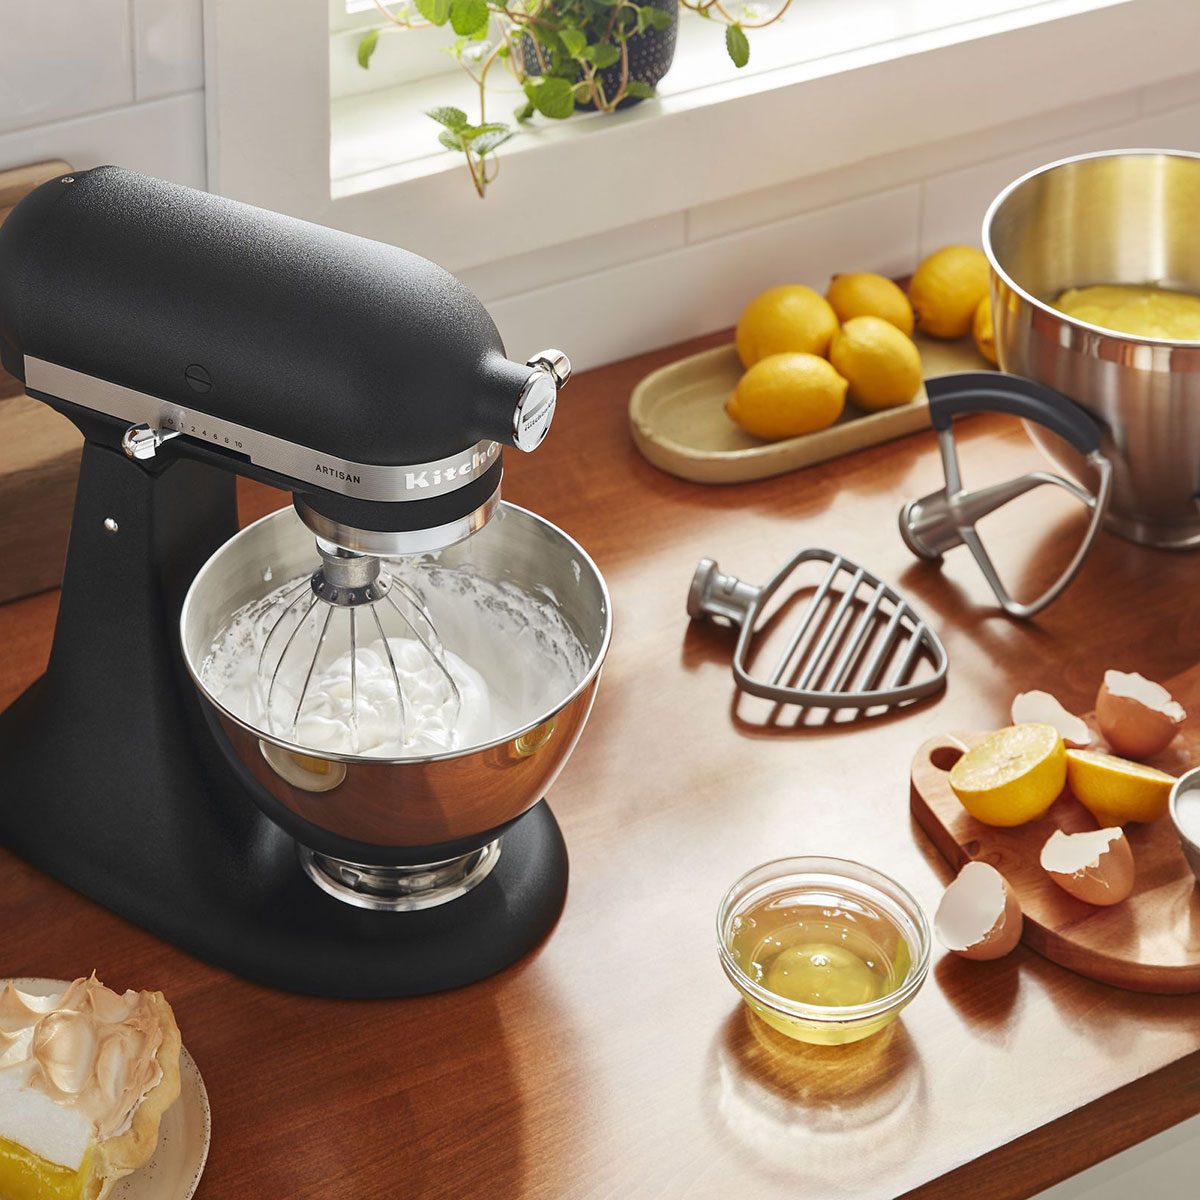 Today only! Score a KitchenAid mixer for the lowest price on the